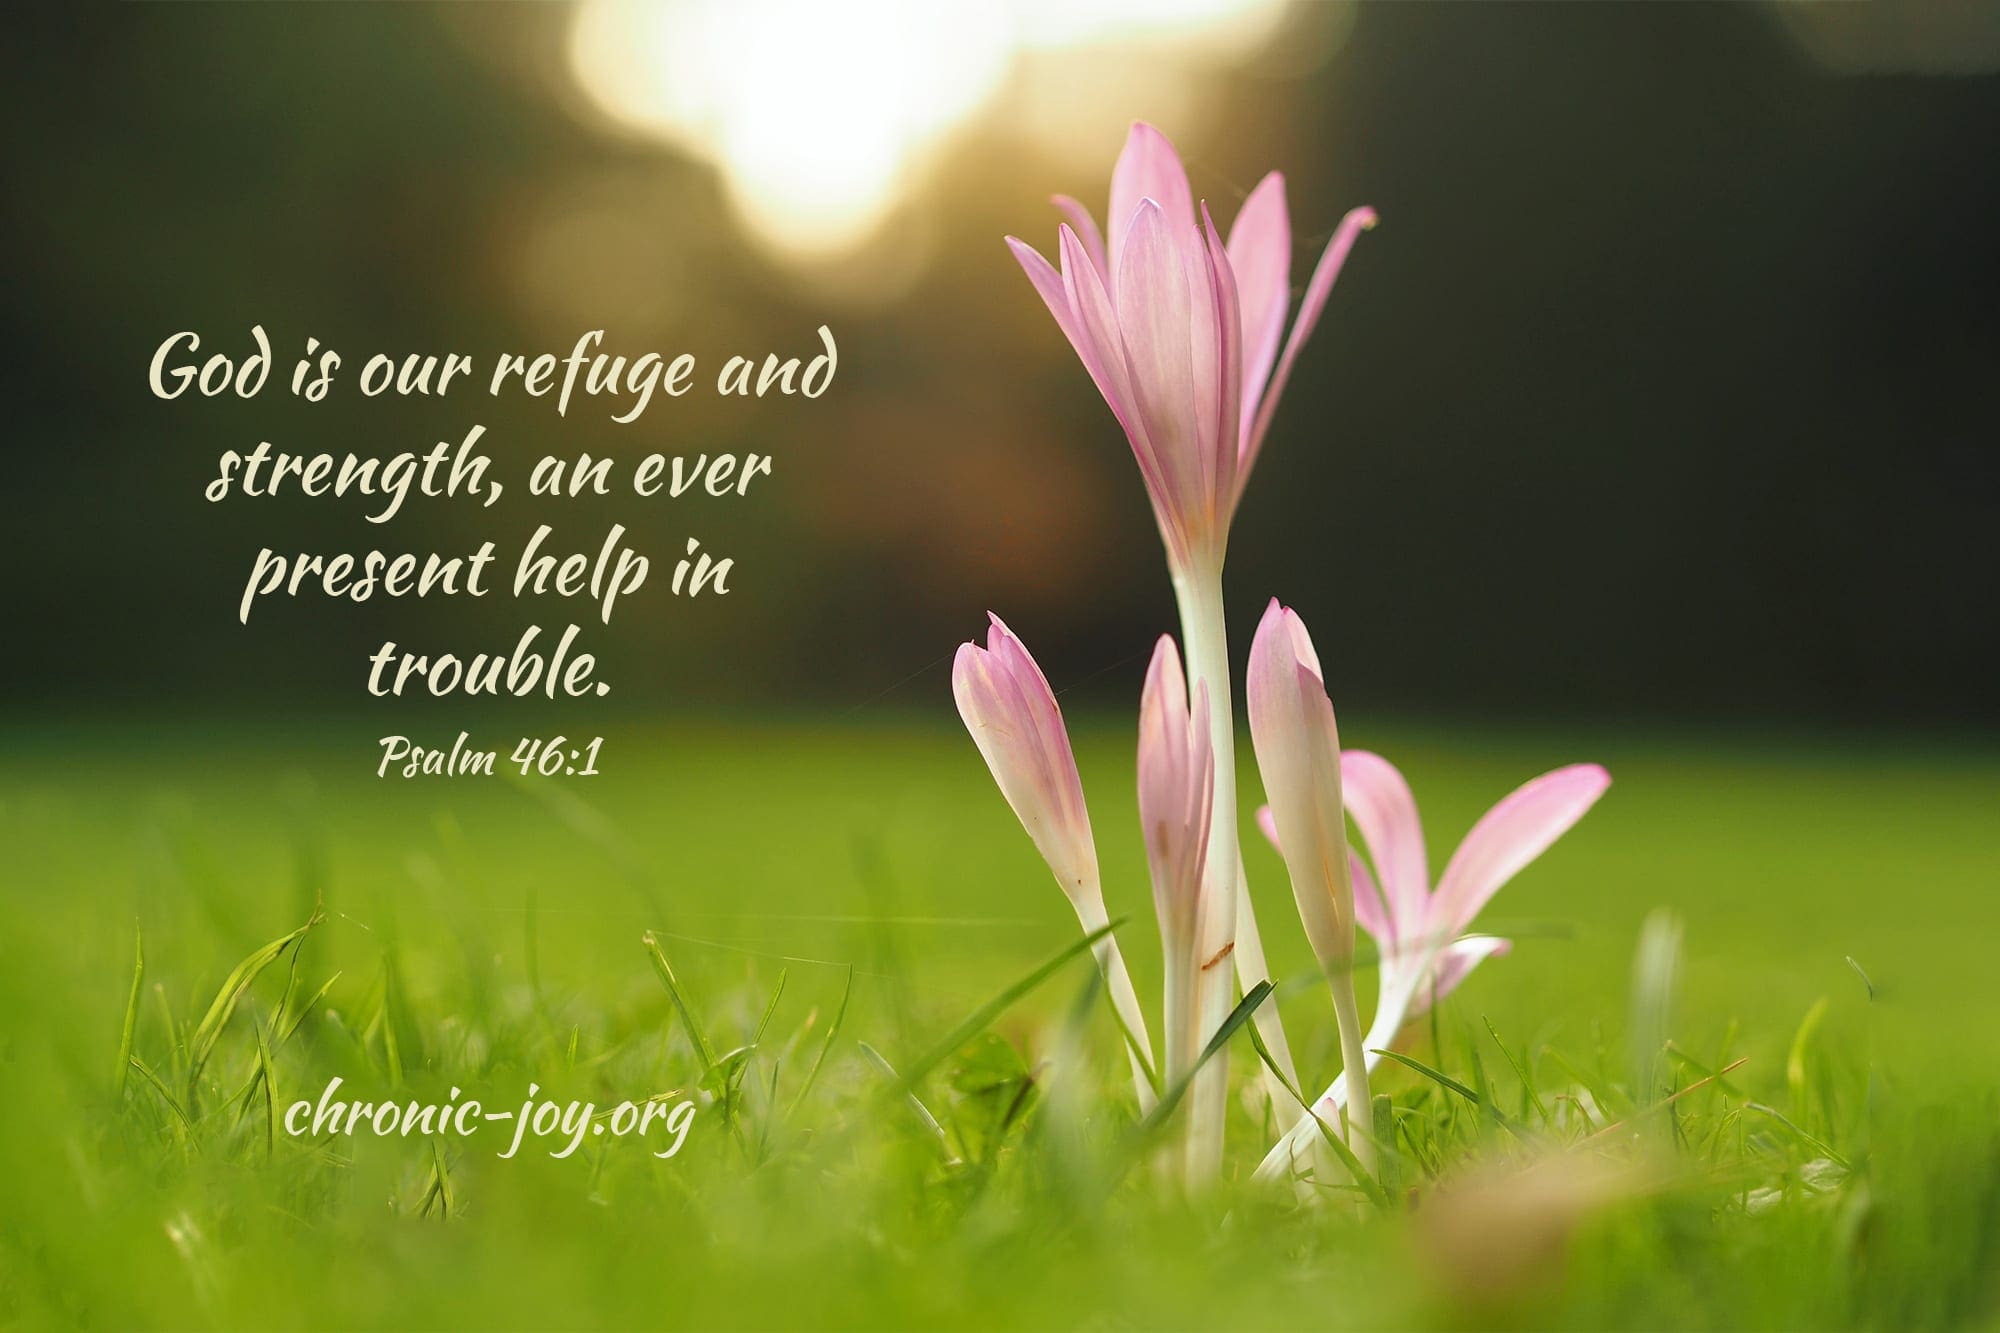 God is our refuge and strength, an ever present help in trouble.  Psalm 46:1